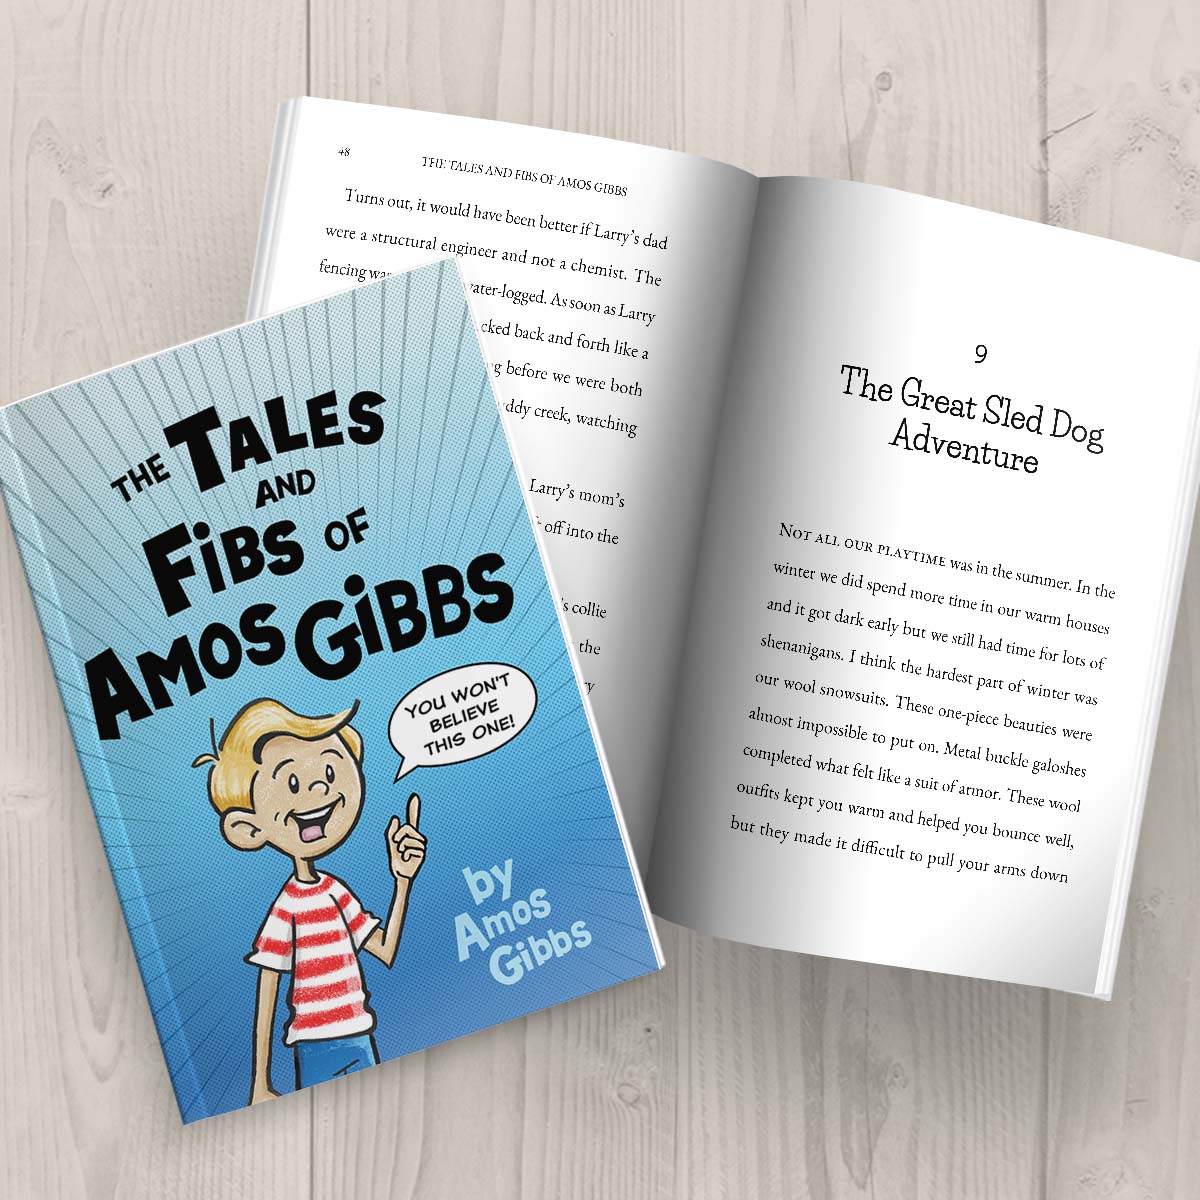 The Tales and Fibbs of Amos Gibbs by Amos Gibbs paperback book open on table and another copy on top displaying the front cover